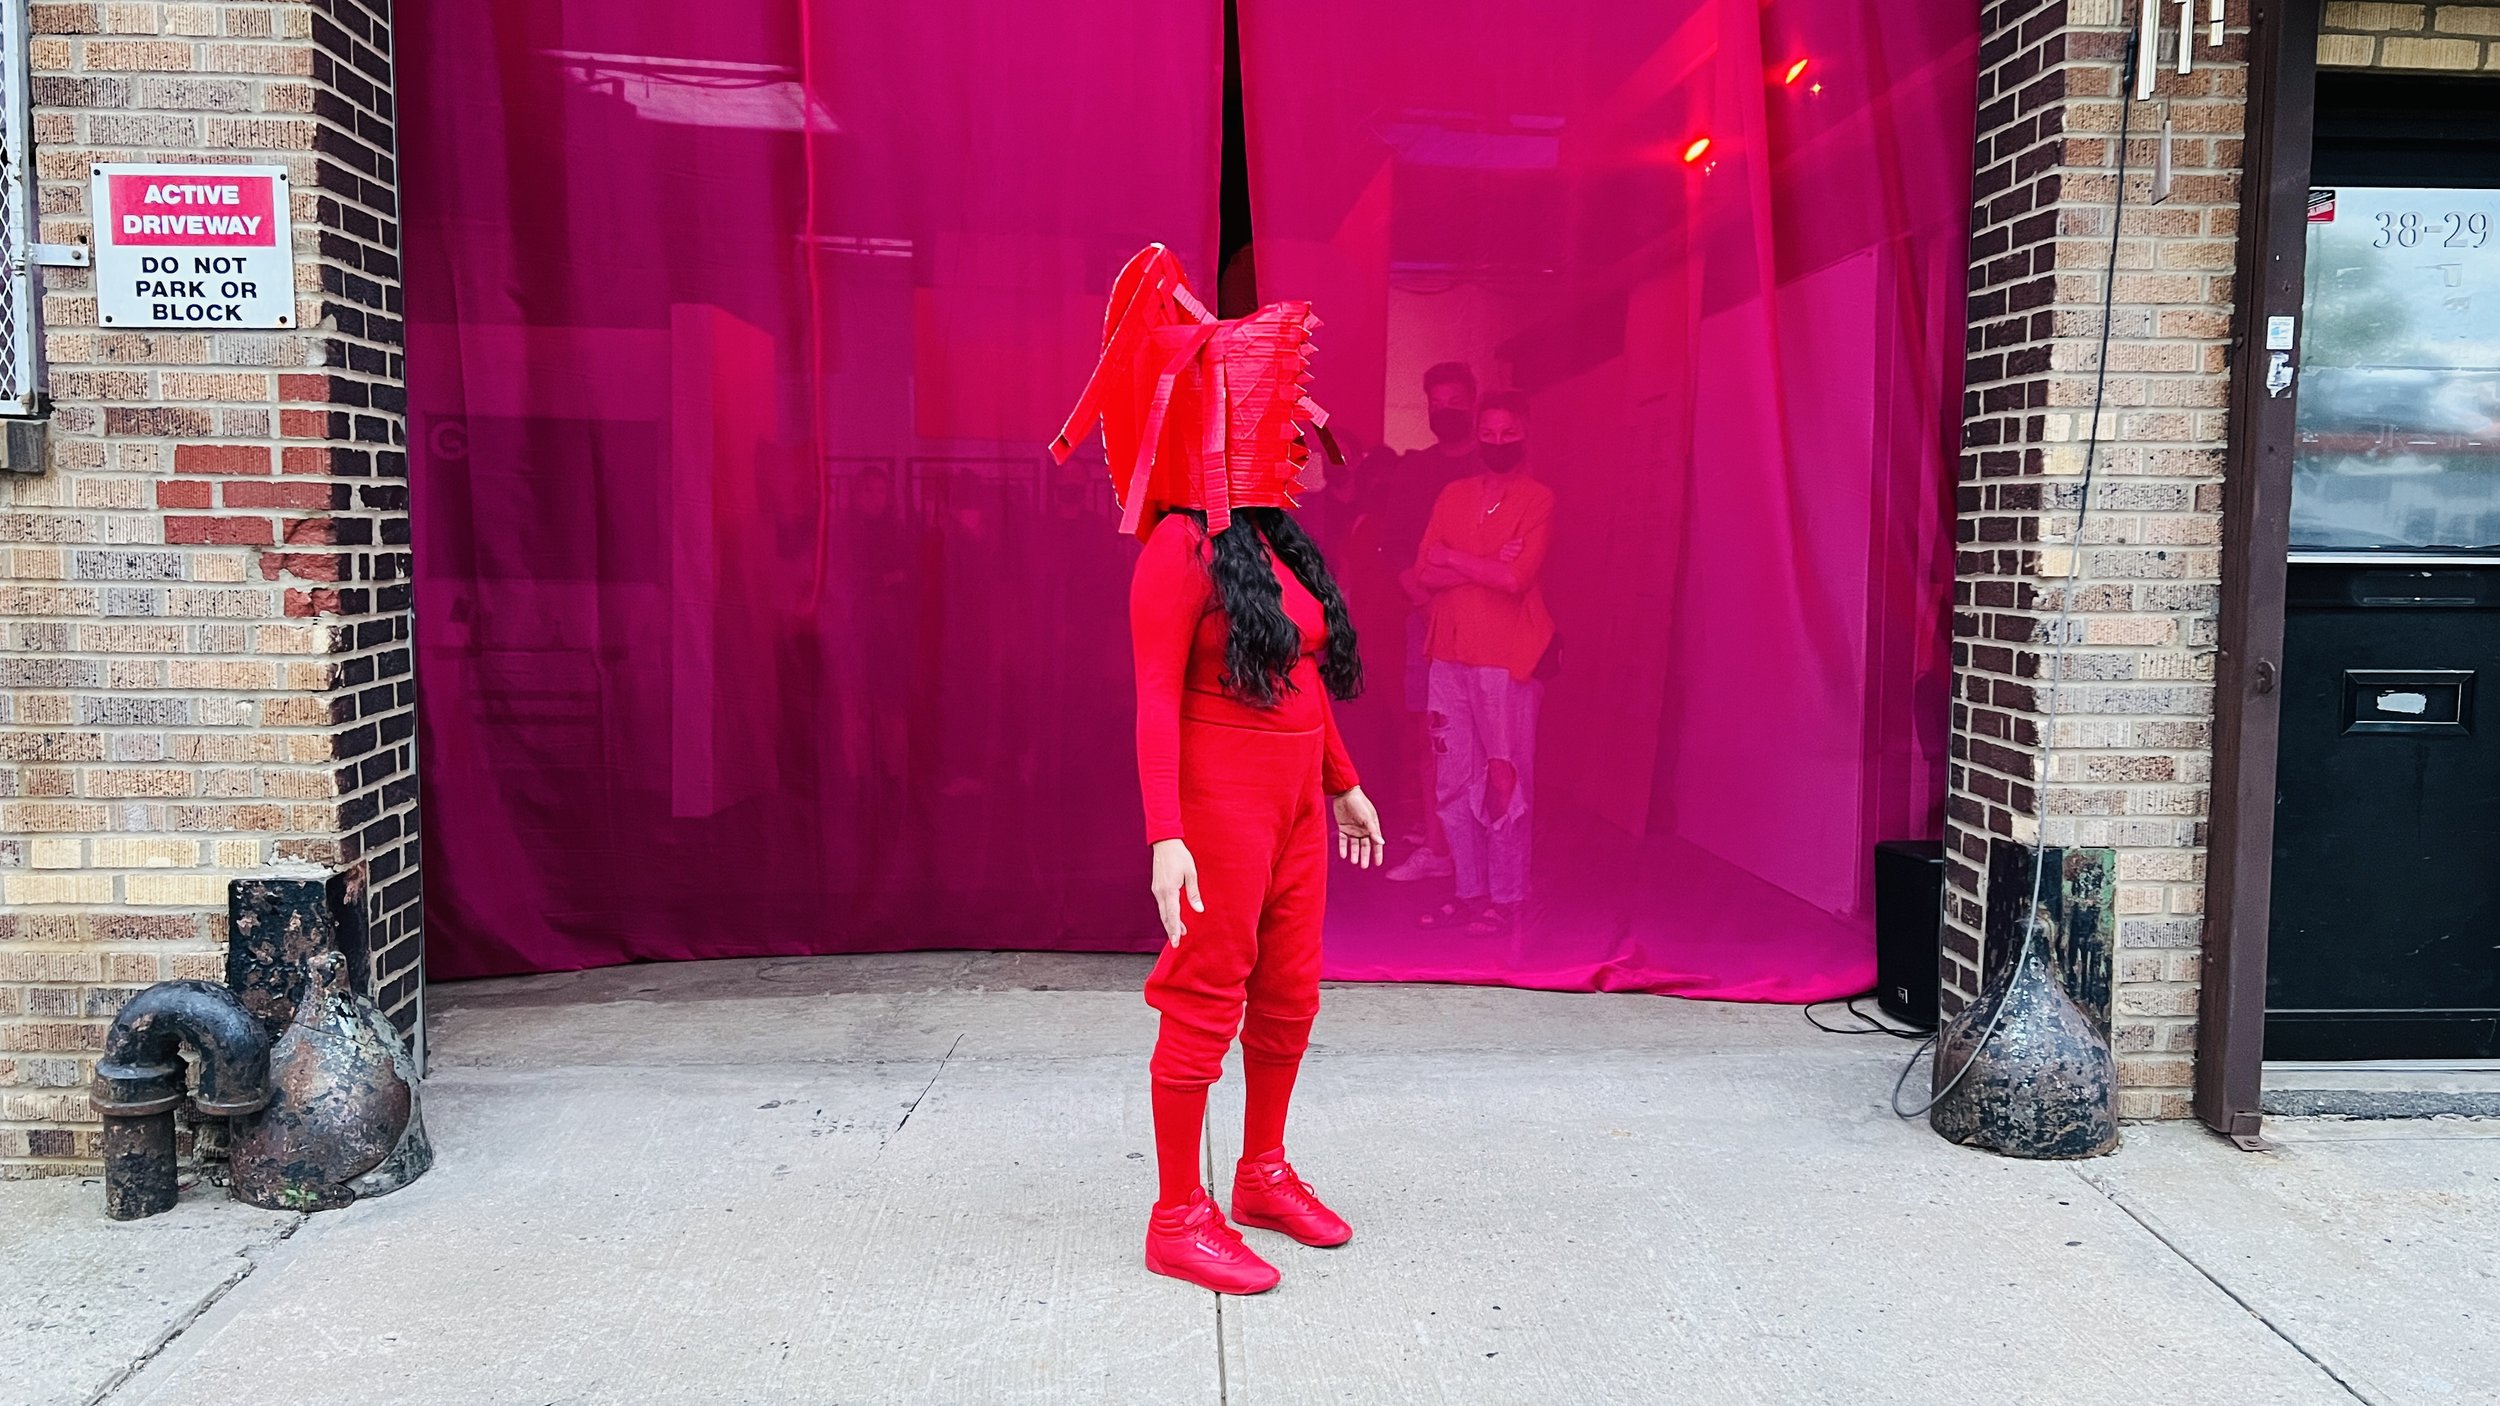 A performer dressed in red from head-to-toe and wearing a red mask with sharp points, stands in front of a billowing pink curtain outisde of a large rolling gate. Photo by Brian Rogers.